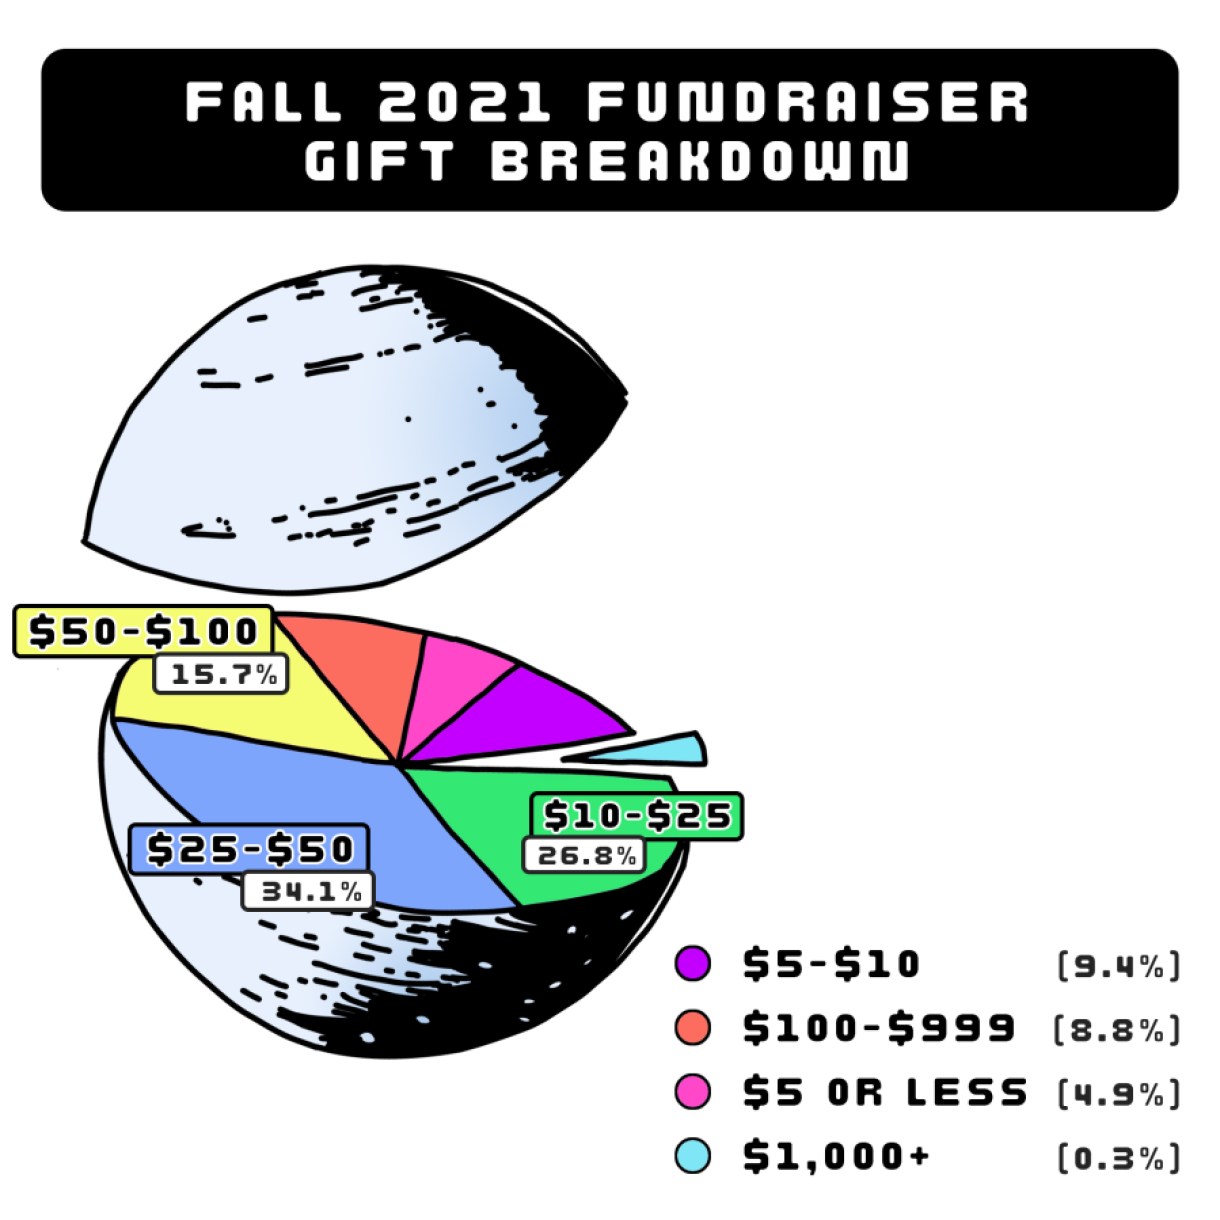 Fall 2021 Fundraiser Gift Breakdown. 4.9% were $5 or less, 9.4% were $5-$10, 26.8% were $10-$25, 34.1% $25-$50, 15.7% were $50-$100, 8.8% is $100-$999, and 0.3% were $1,000+